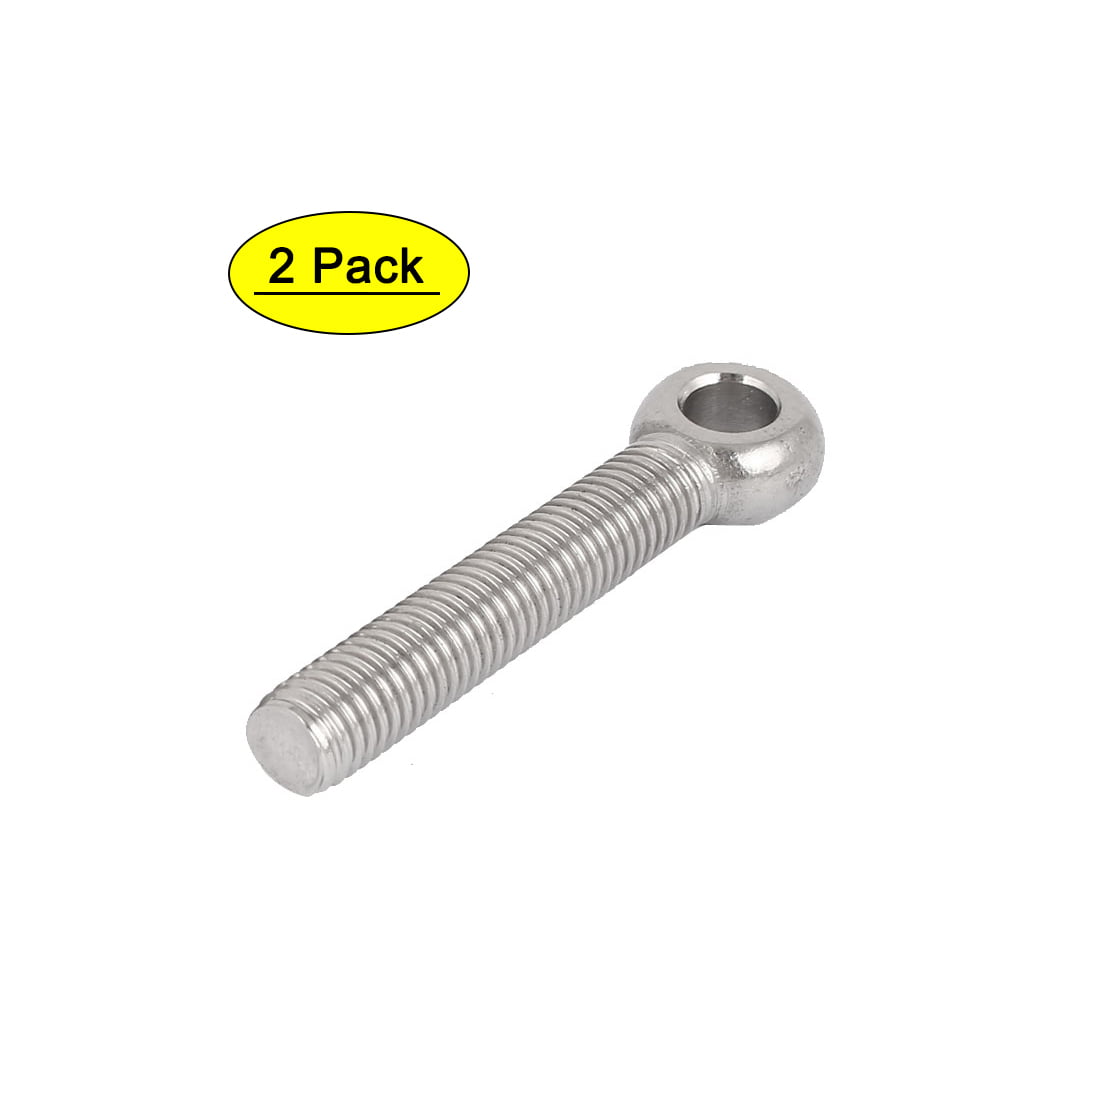 Strong and Sturdy Lifting Eye Nuts/Screw Ring Eyebolt Ring Hooking Nut Screws M3 M4 M5 M6 M8 M10 M12 304 Stainless Steel Easy to use and Store Color : Lifting Eye Screws, Size : 2pcs M5 